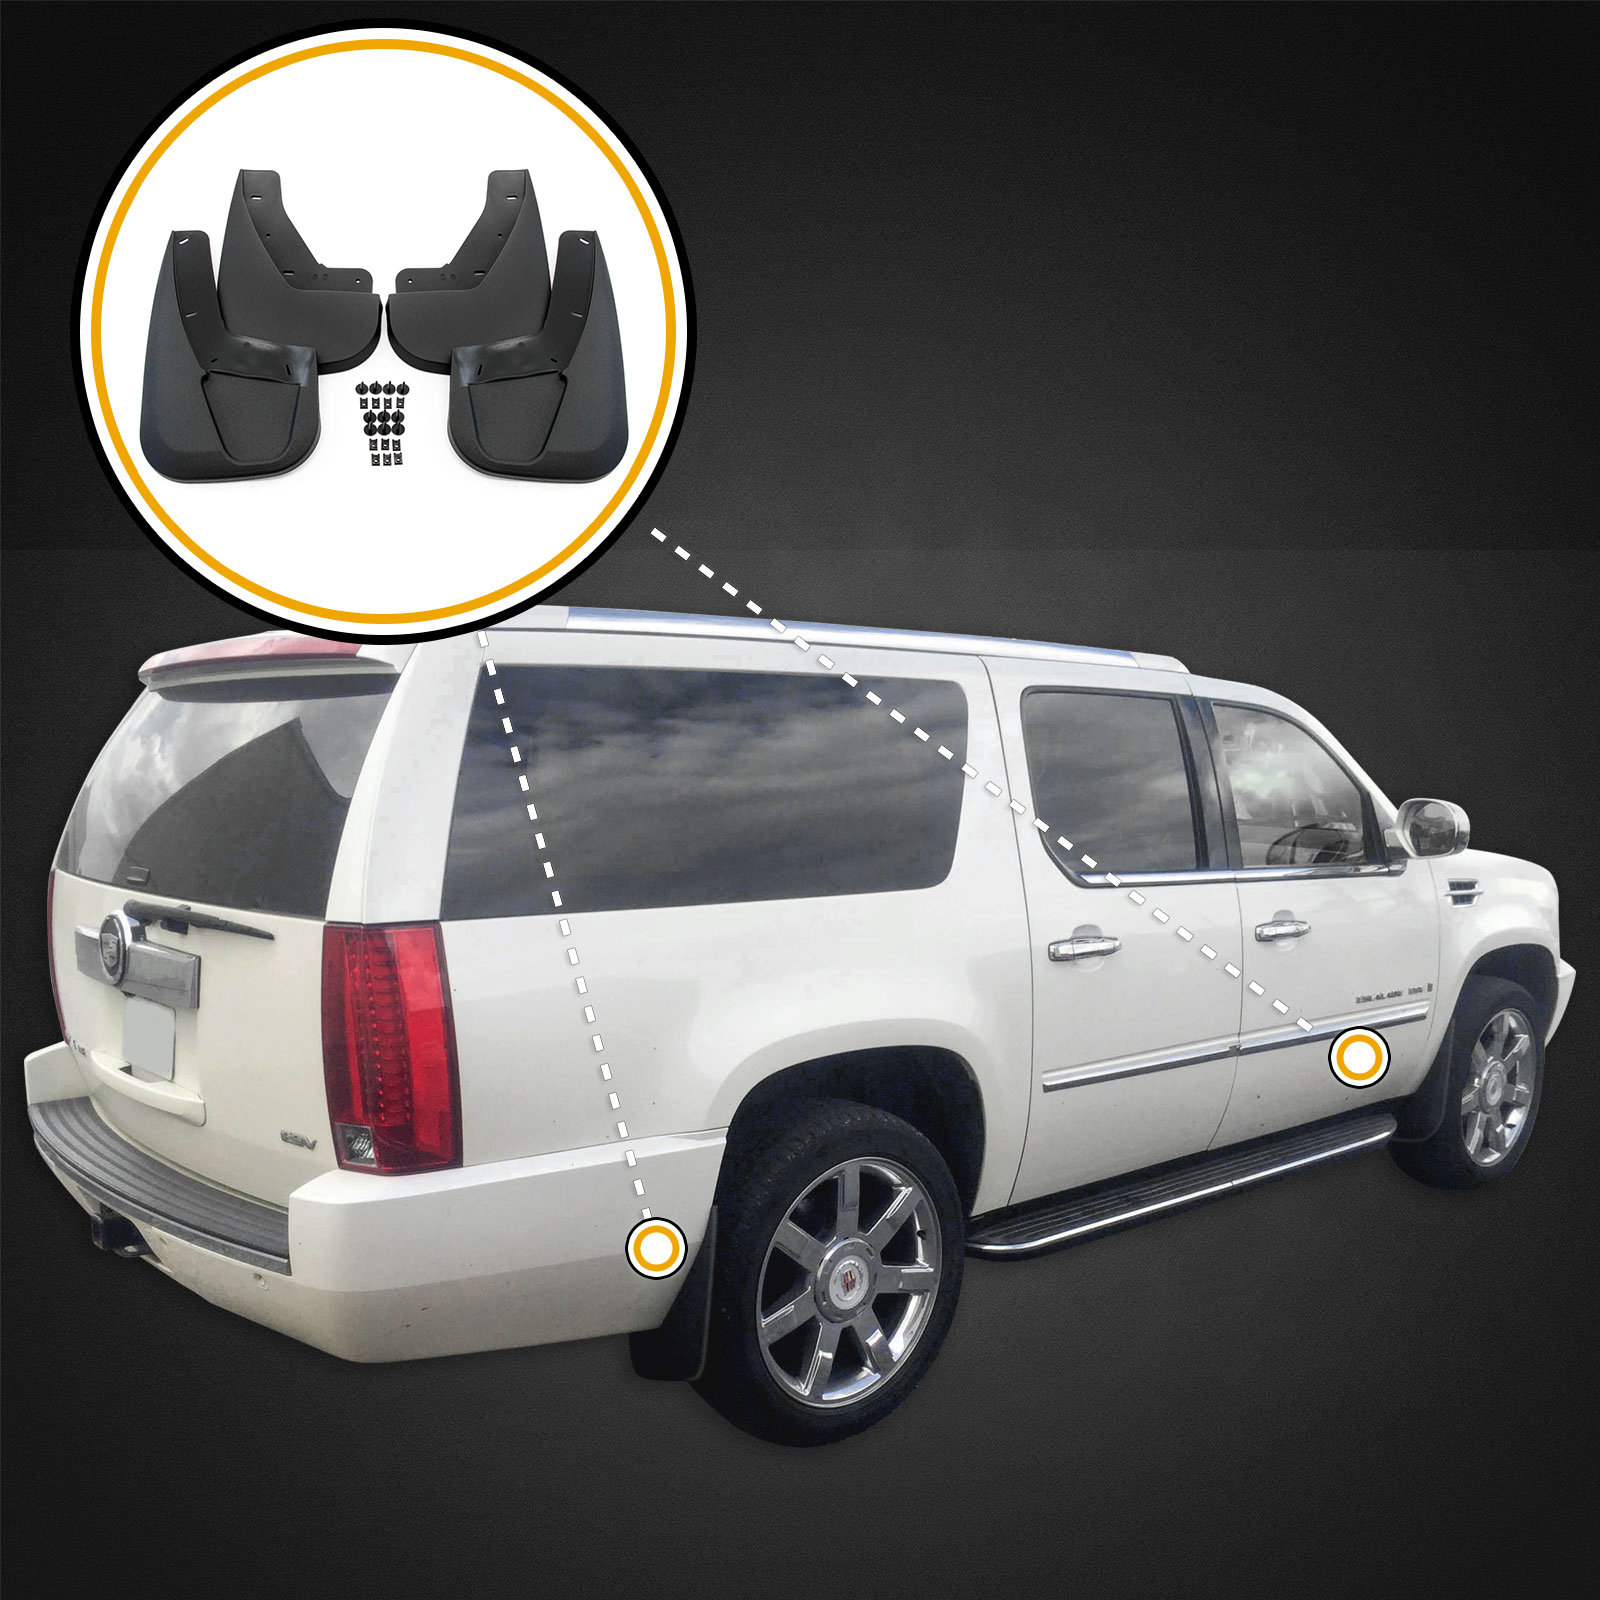 Premium Heavy Duty Molded Compatible with Only 07-14 Escalade 09-14 Tahoe (LTZ Model Only, excludes Z71 Package) Mud Flaps Guards Splash No Flares Front Rear 4pc Set 19212787 19212797 19212811 - image 2 of 7